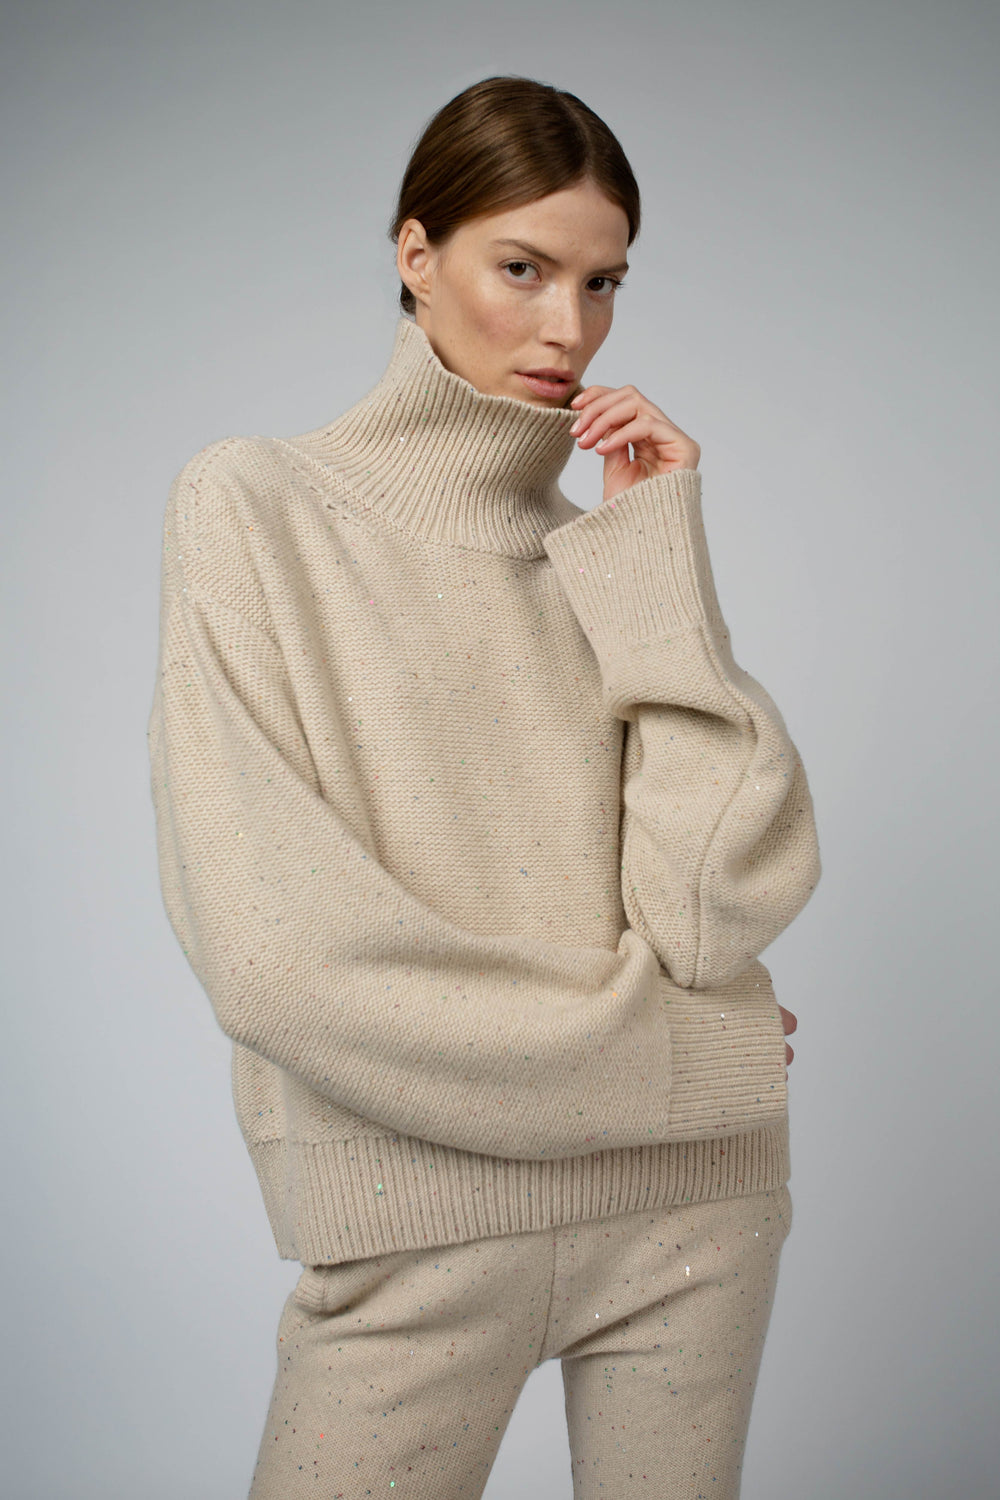 CIO CASHMERE RELAXED FIT SWEATER IN BEIGE SPARKLE